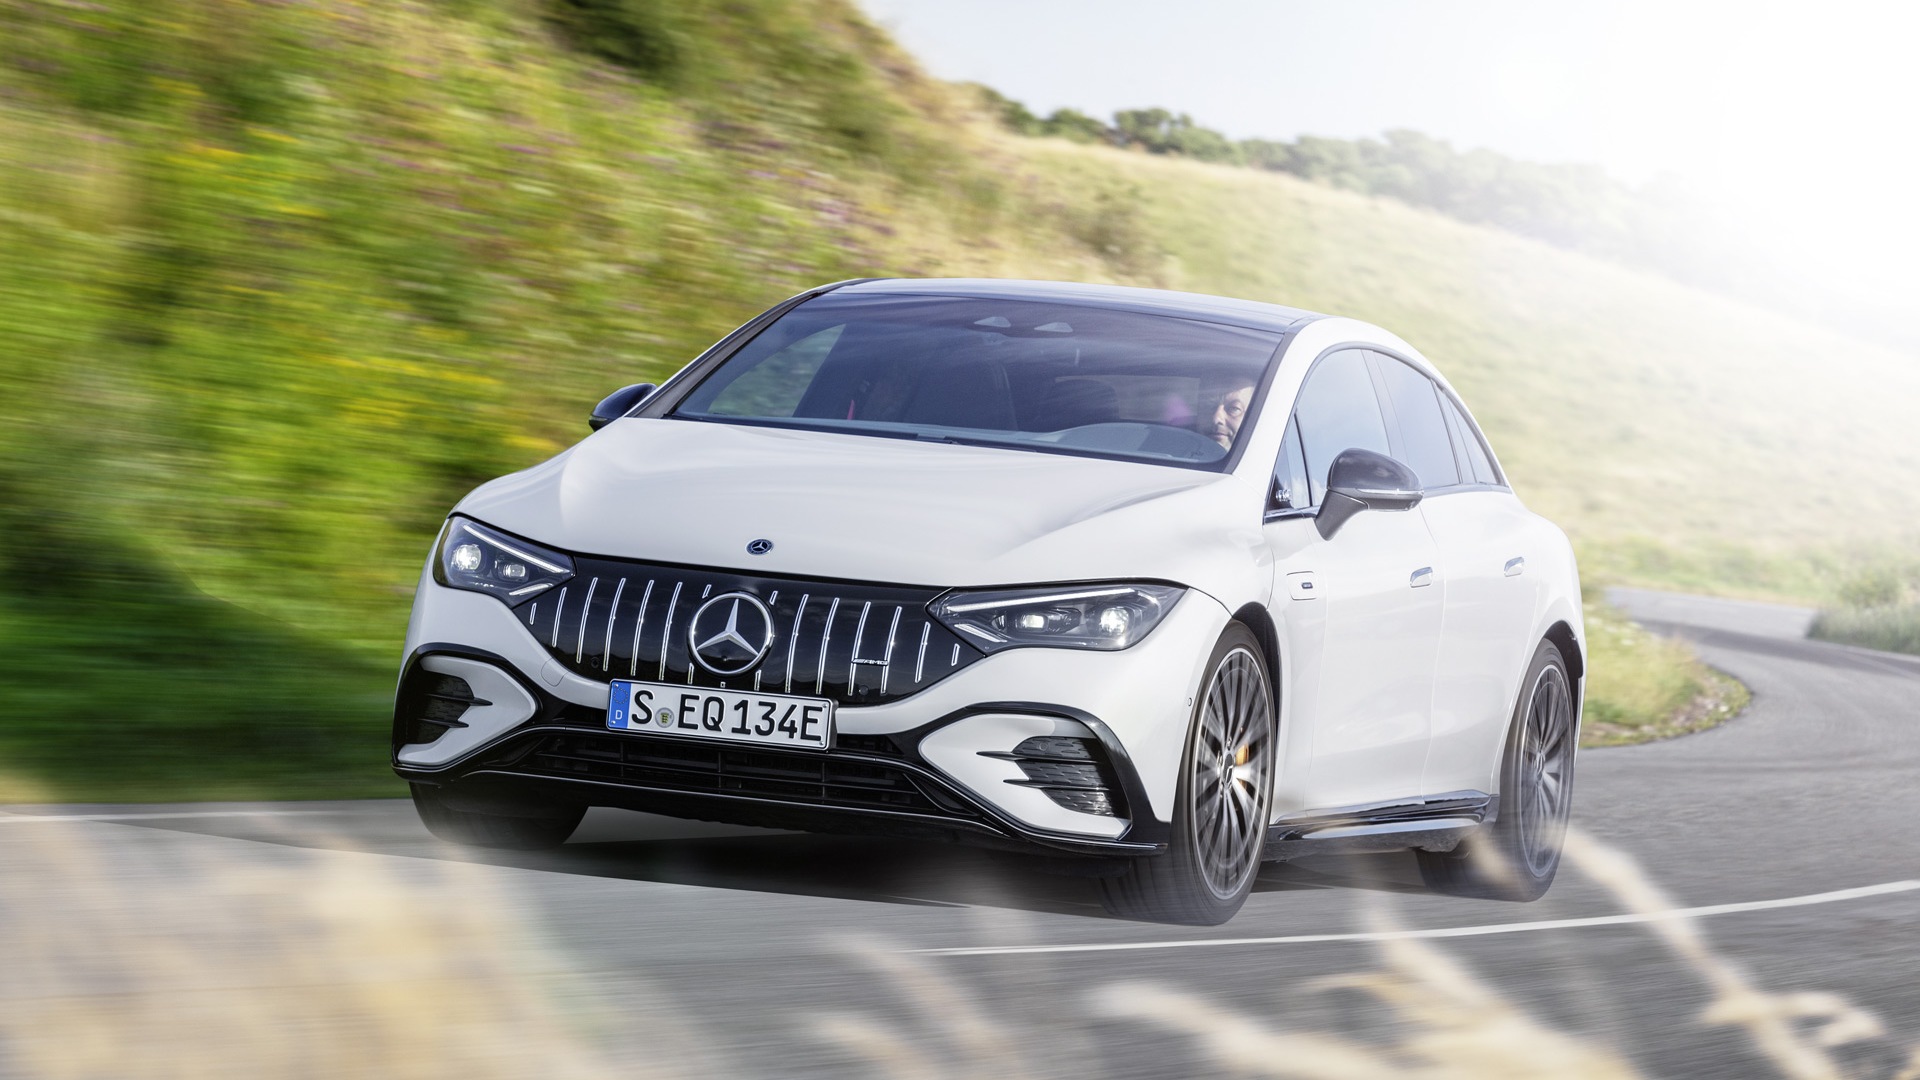 2023 Mercedes AMG EQE electric sedan puts the priority on performance